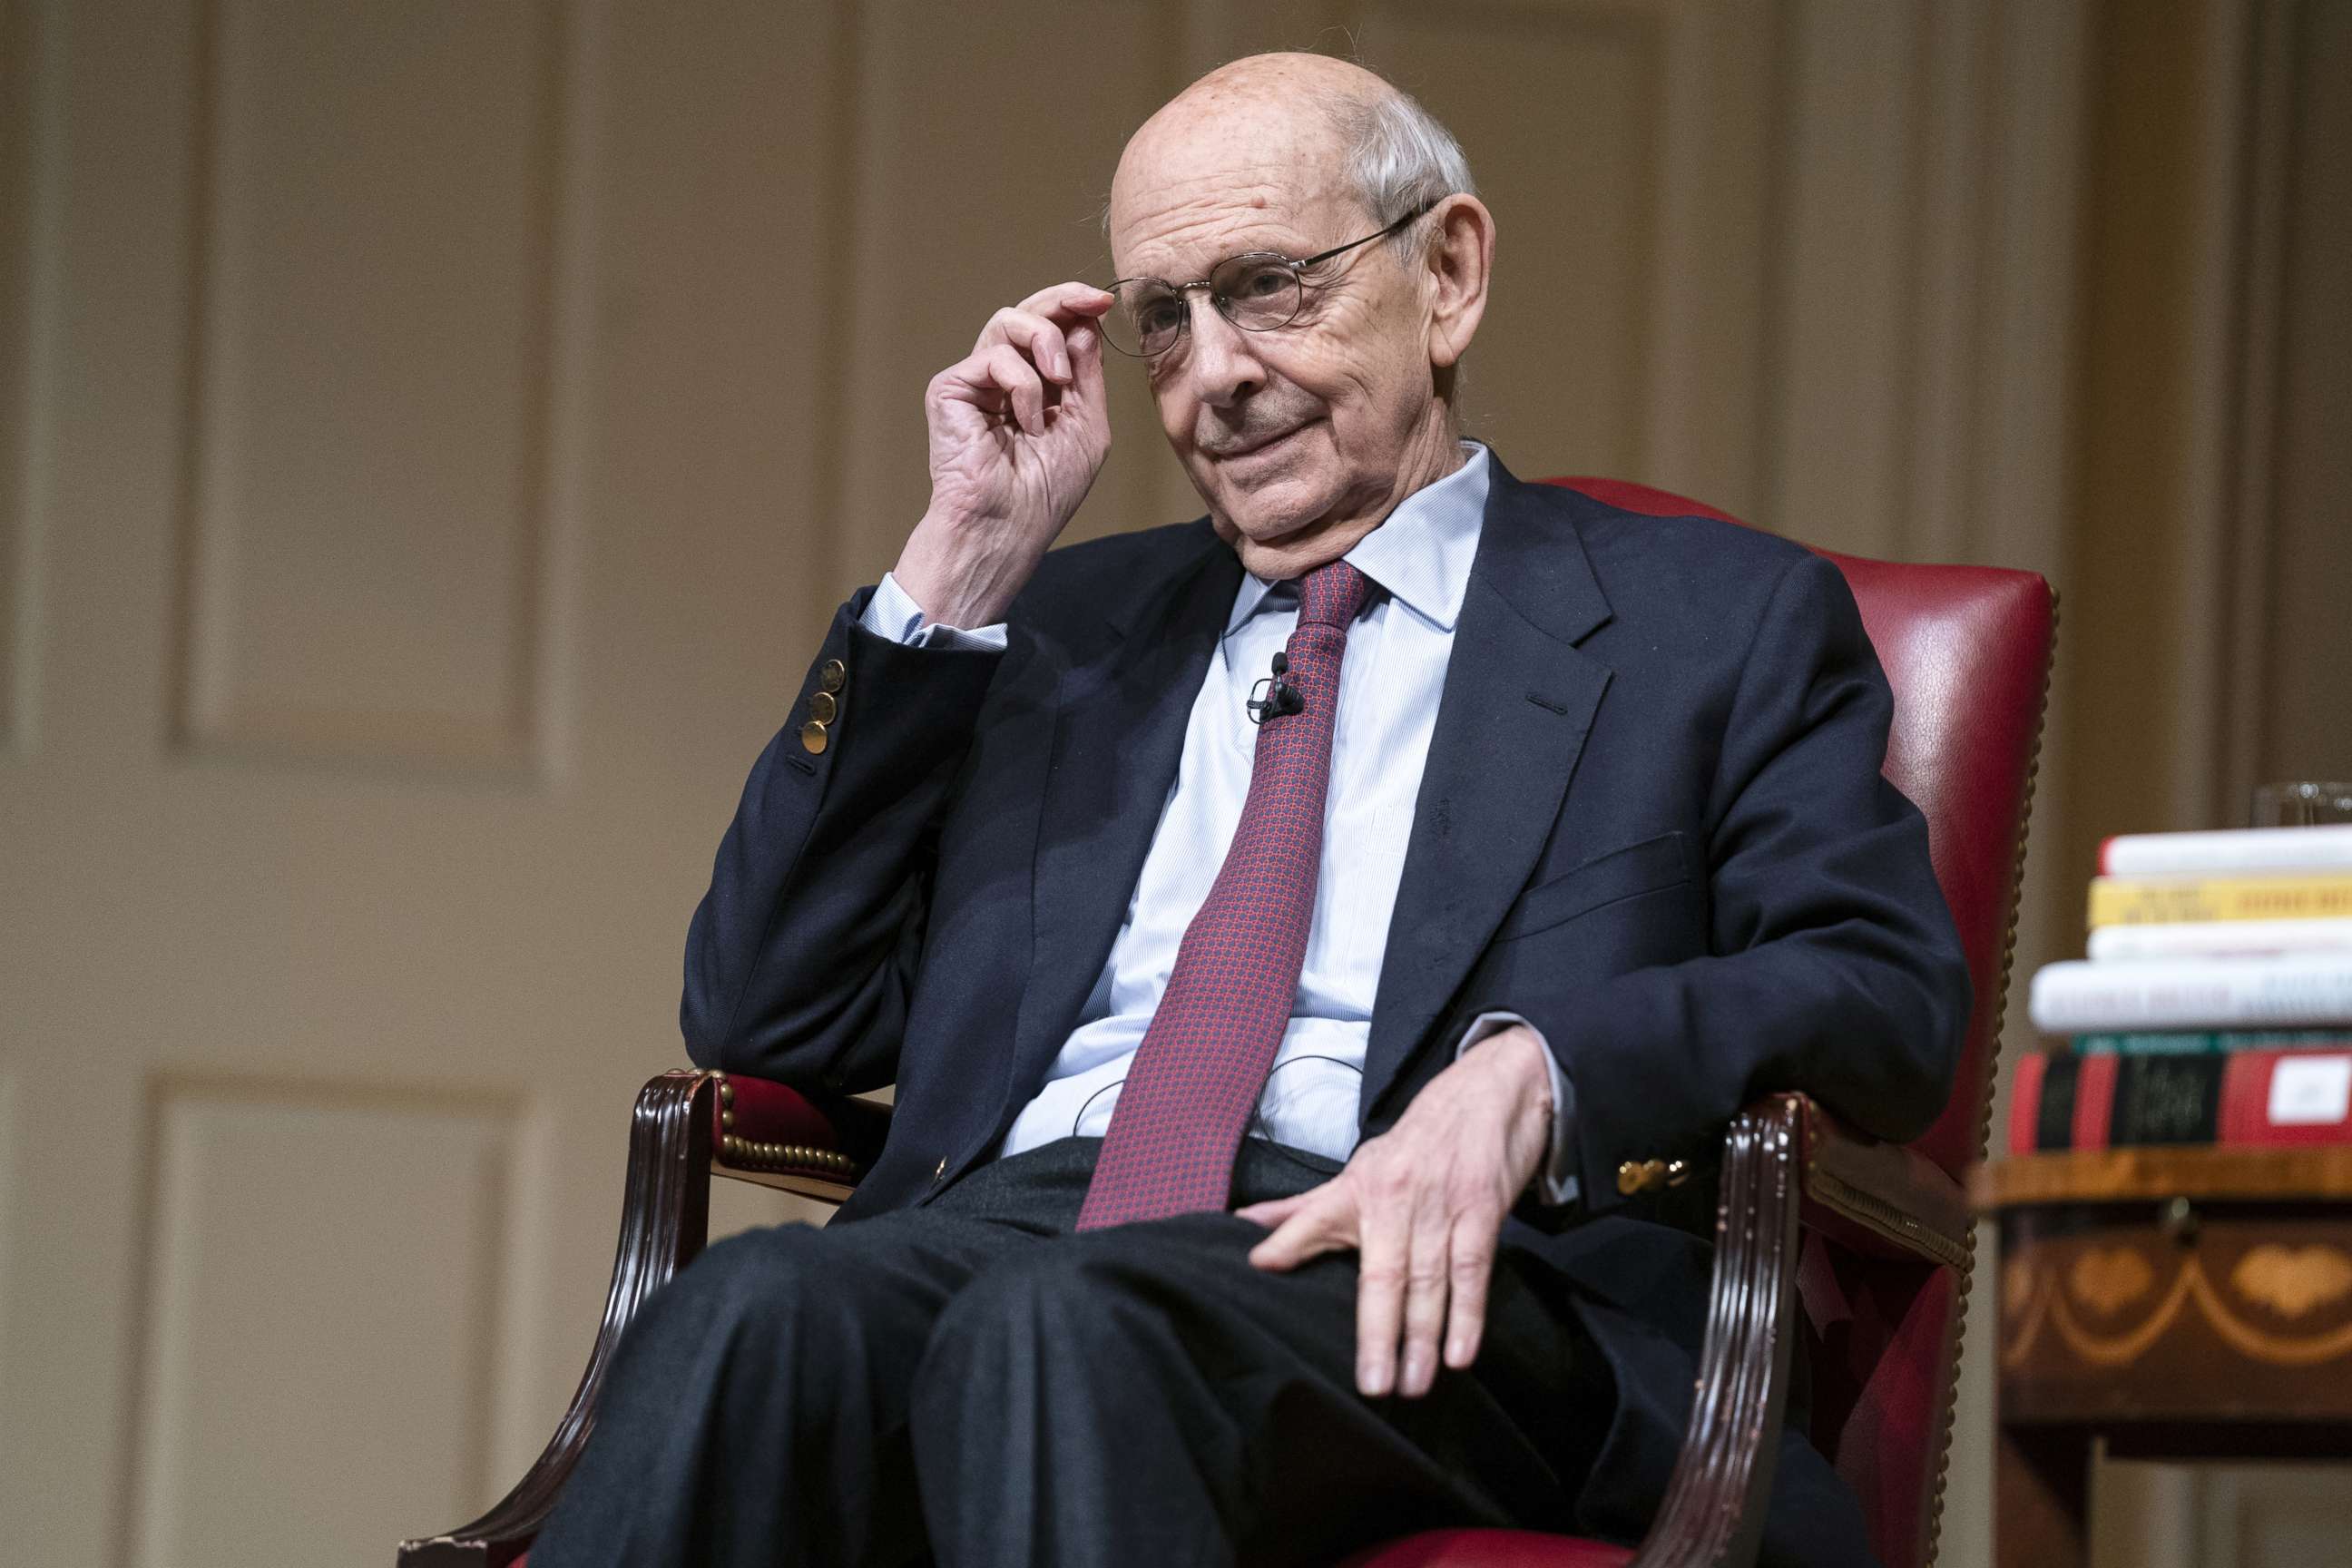 PHOTO: Stephen Breyer, associate justice of the U.S. Supreme Court, speaks during a discussion at the Law Library of Congress in Washington, D.C., Feb. 17, 2022.